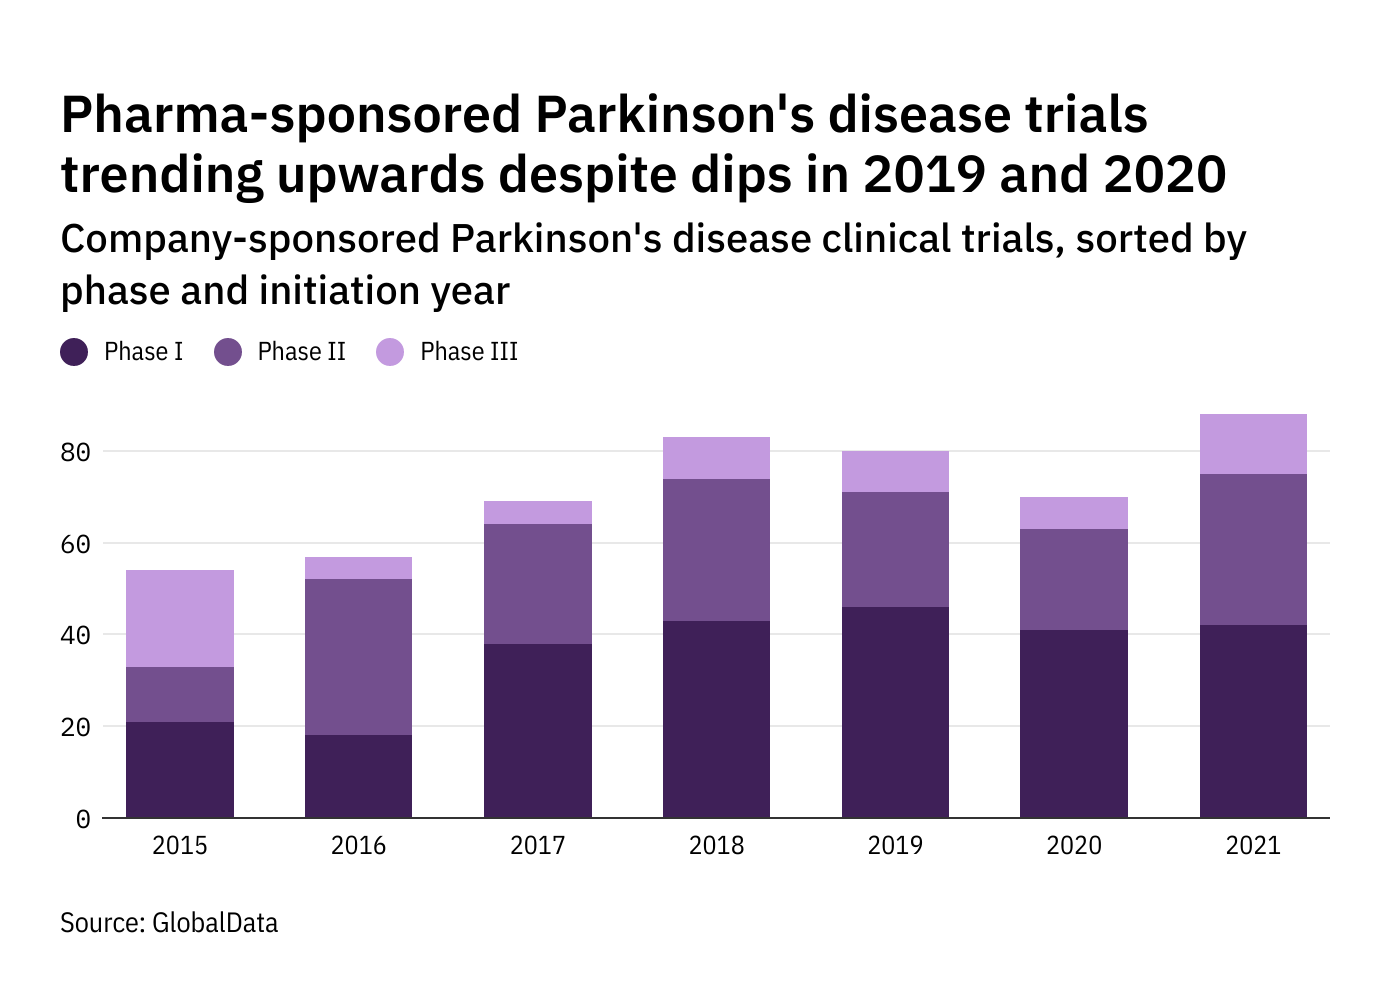 Parkinson's disease: Cerevance outlines Phase II/III trial planned for Q1 2023